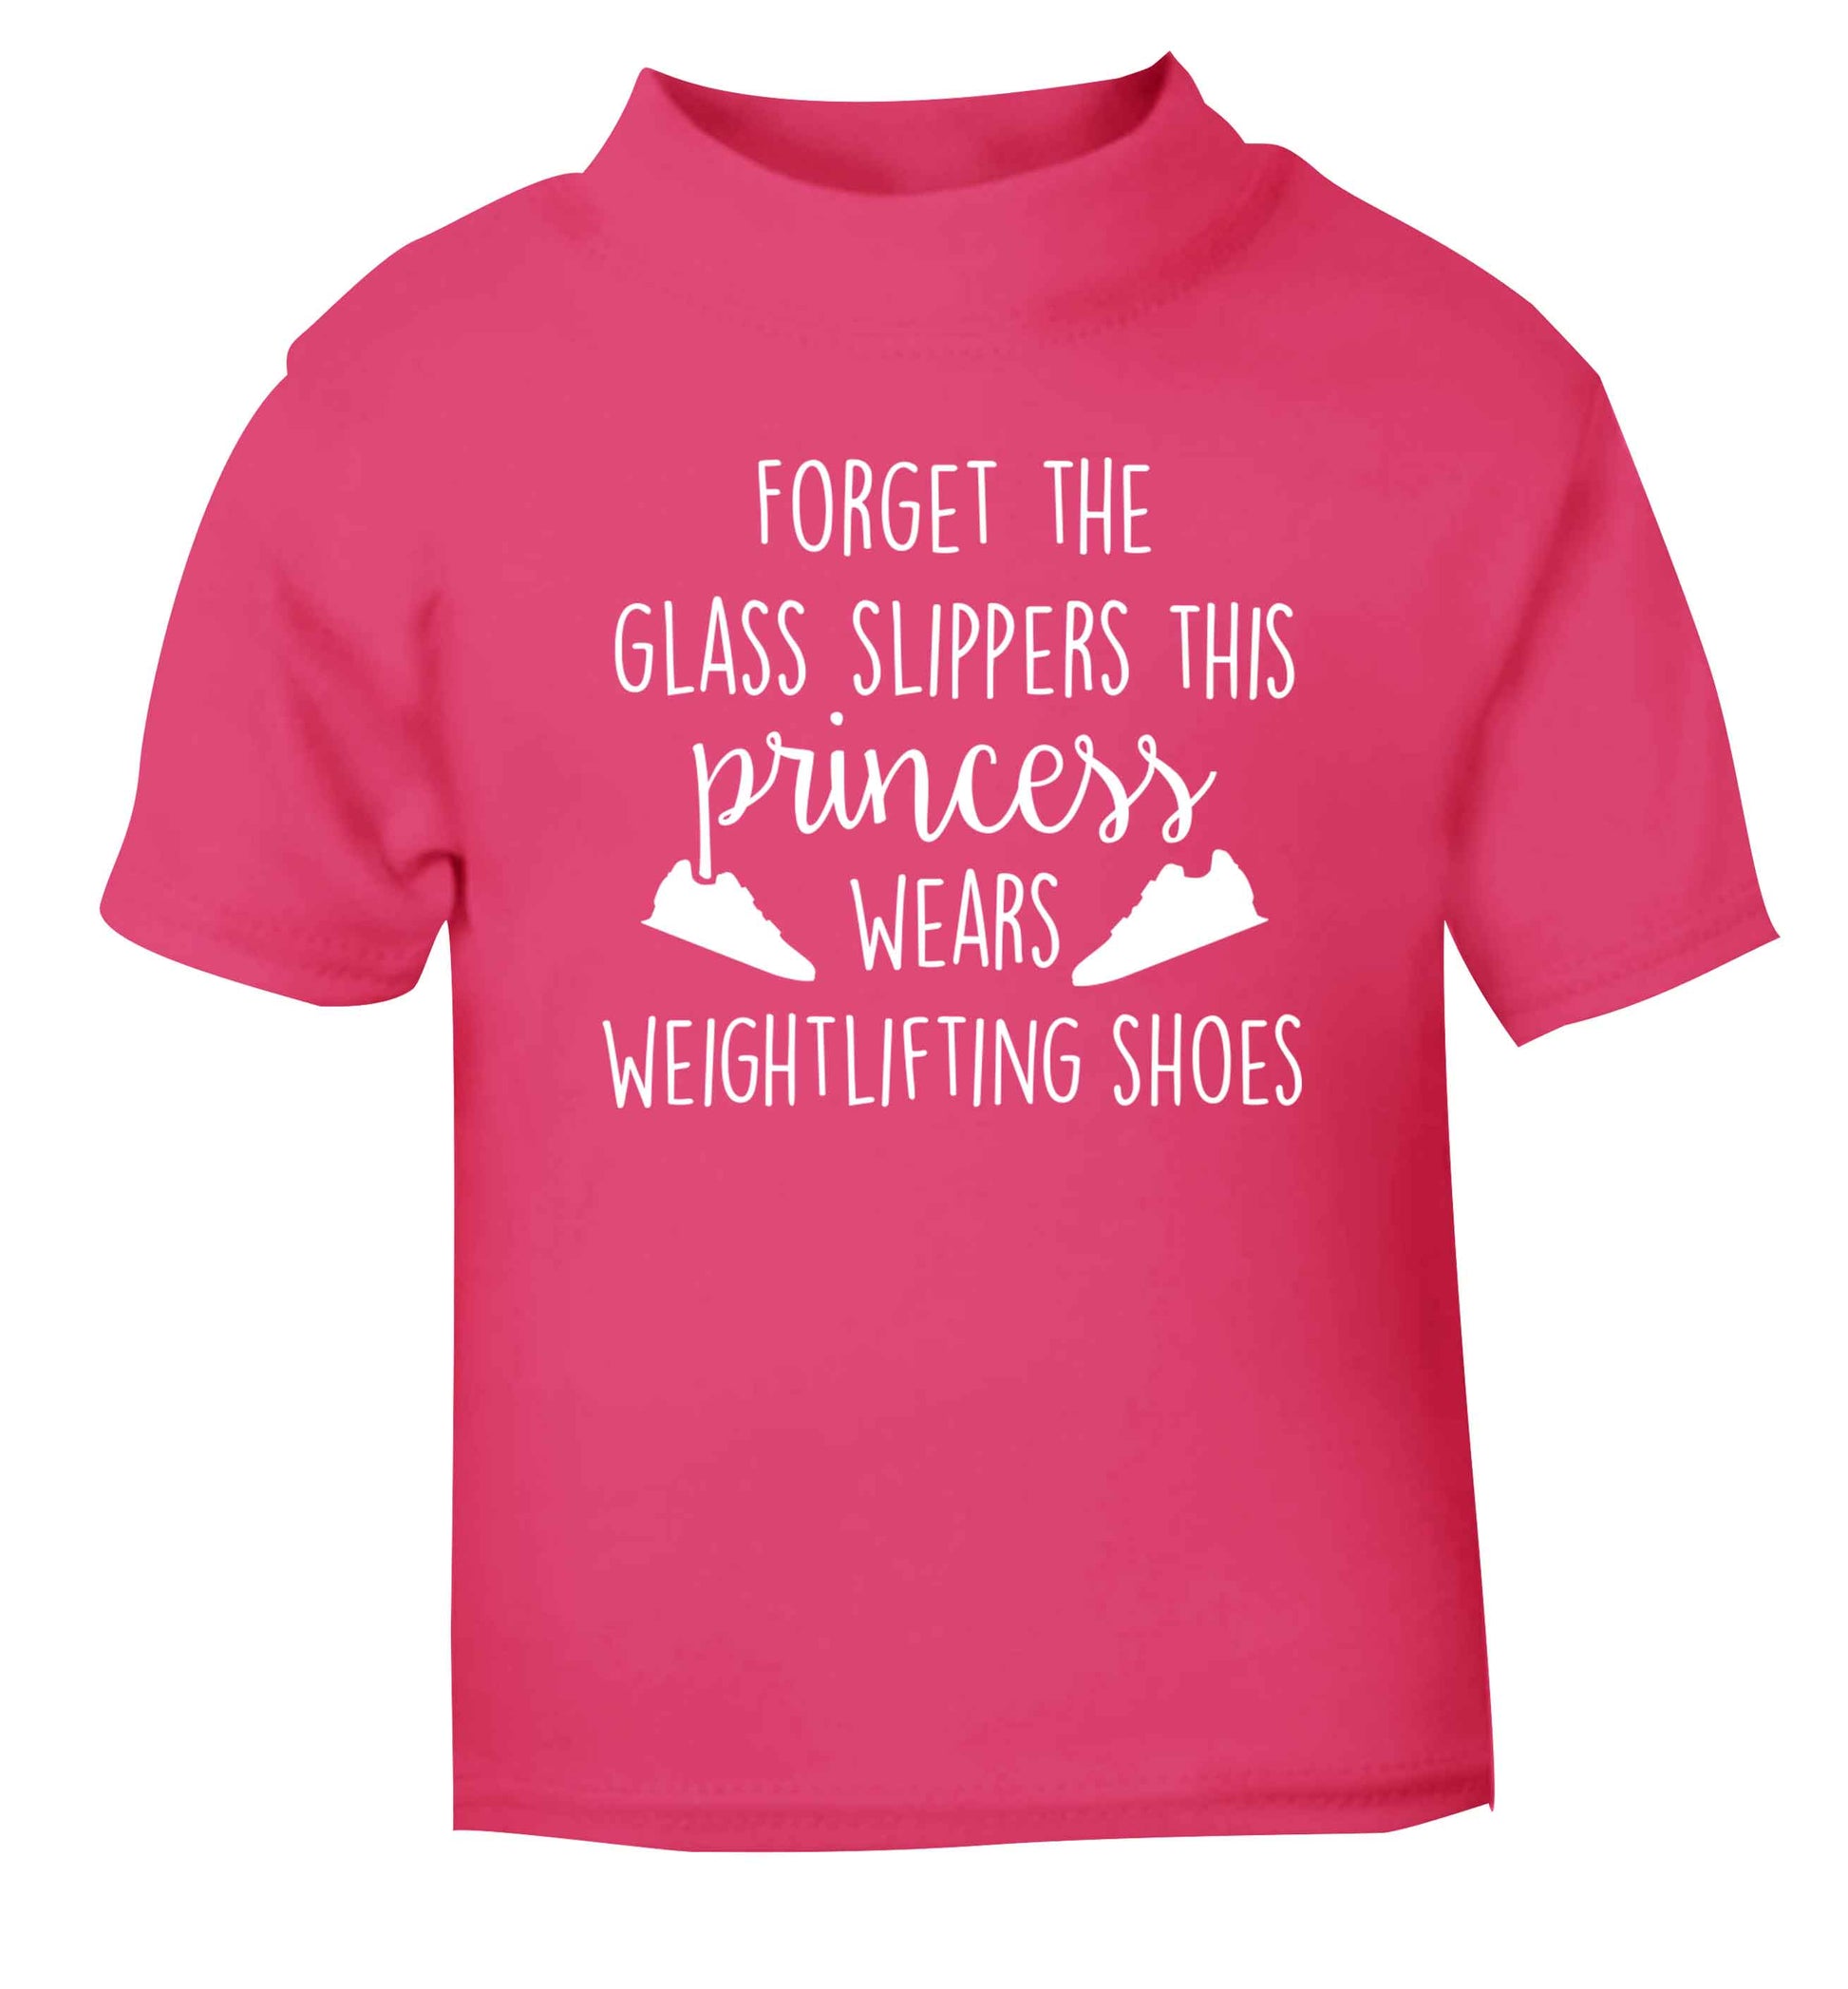 Forget the glass slippers this princess wears weightlifting shoes pink Baby Toddler Tshirt 2 Years